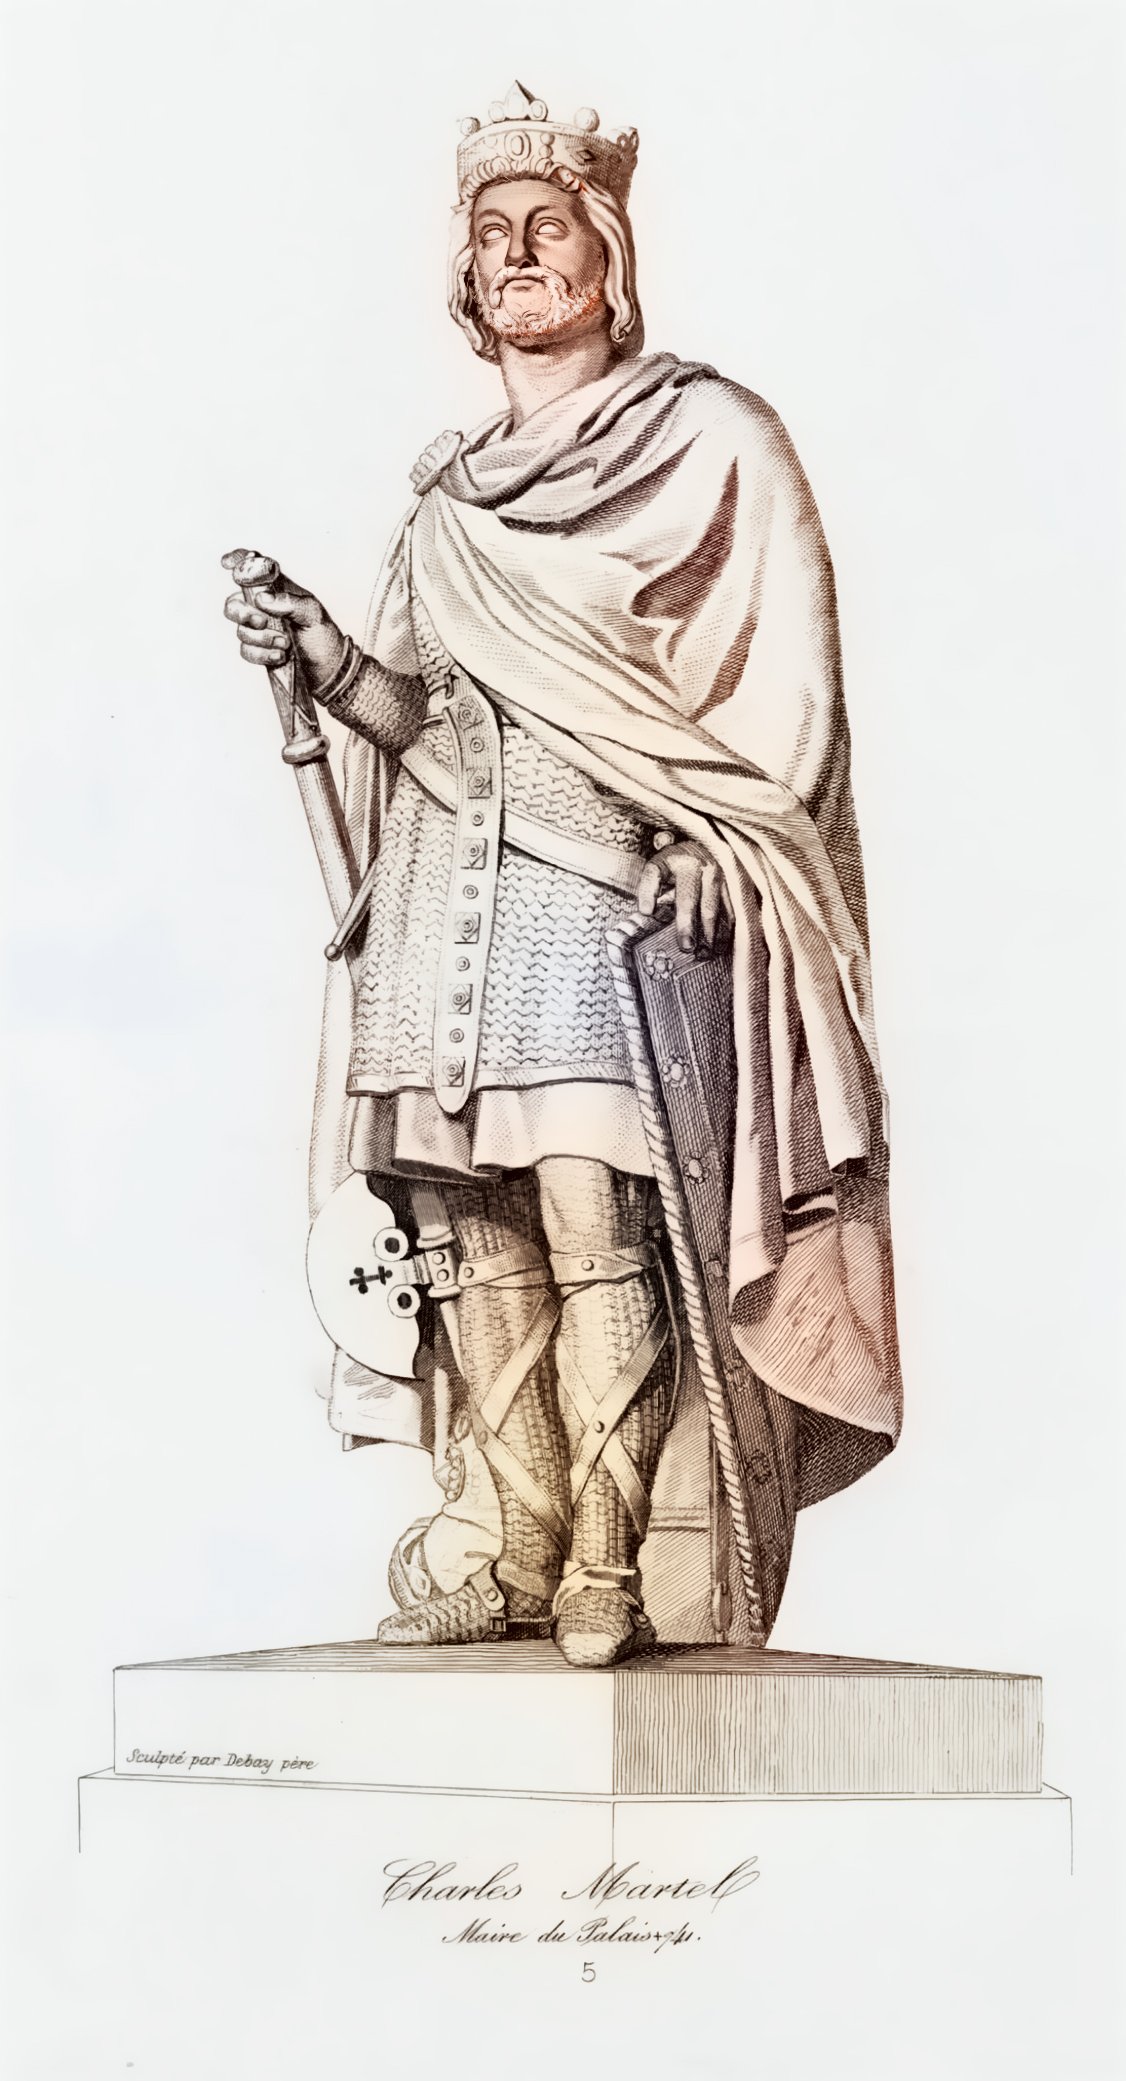 A drawing of a statue of Charles Martel, a Frankish statesman and military leader who defeated the Moors at the Battle of Tours in 732. The statue shows him wearing a crown, a cloak, and armor, holding a sword and a shield. The statue is on a pedestal with his name written on it. The background is white.